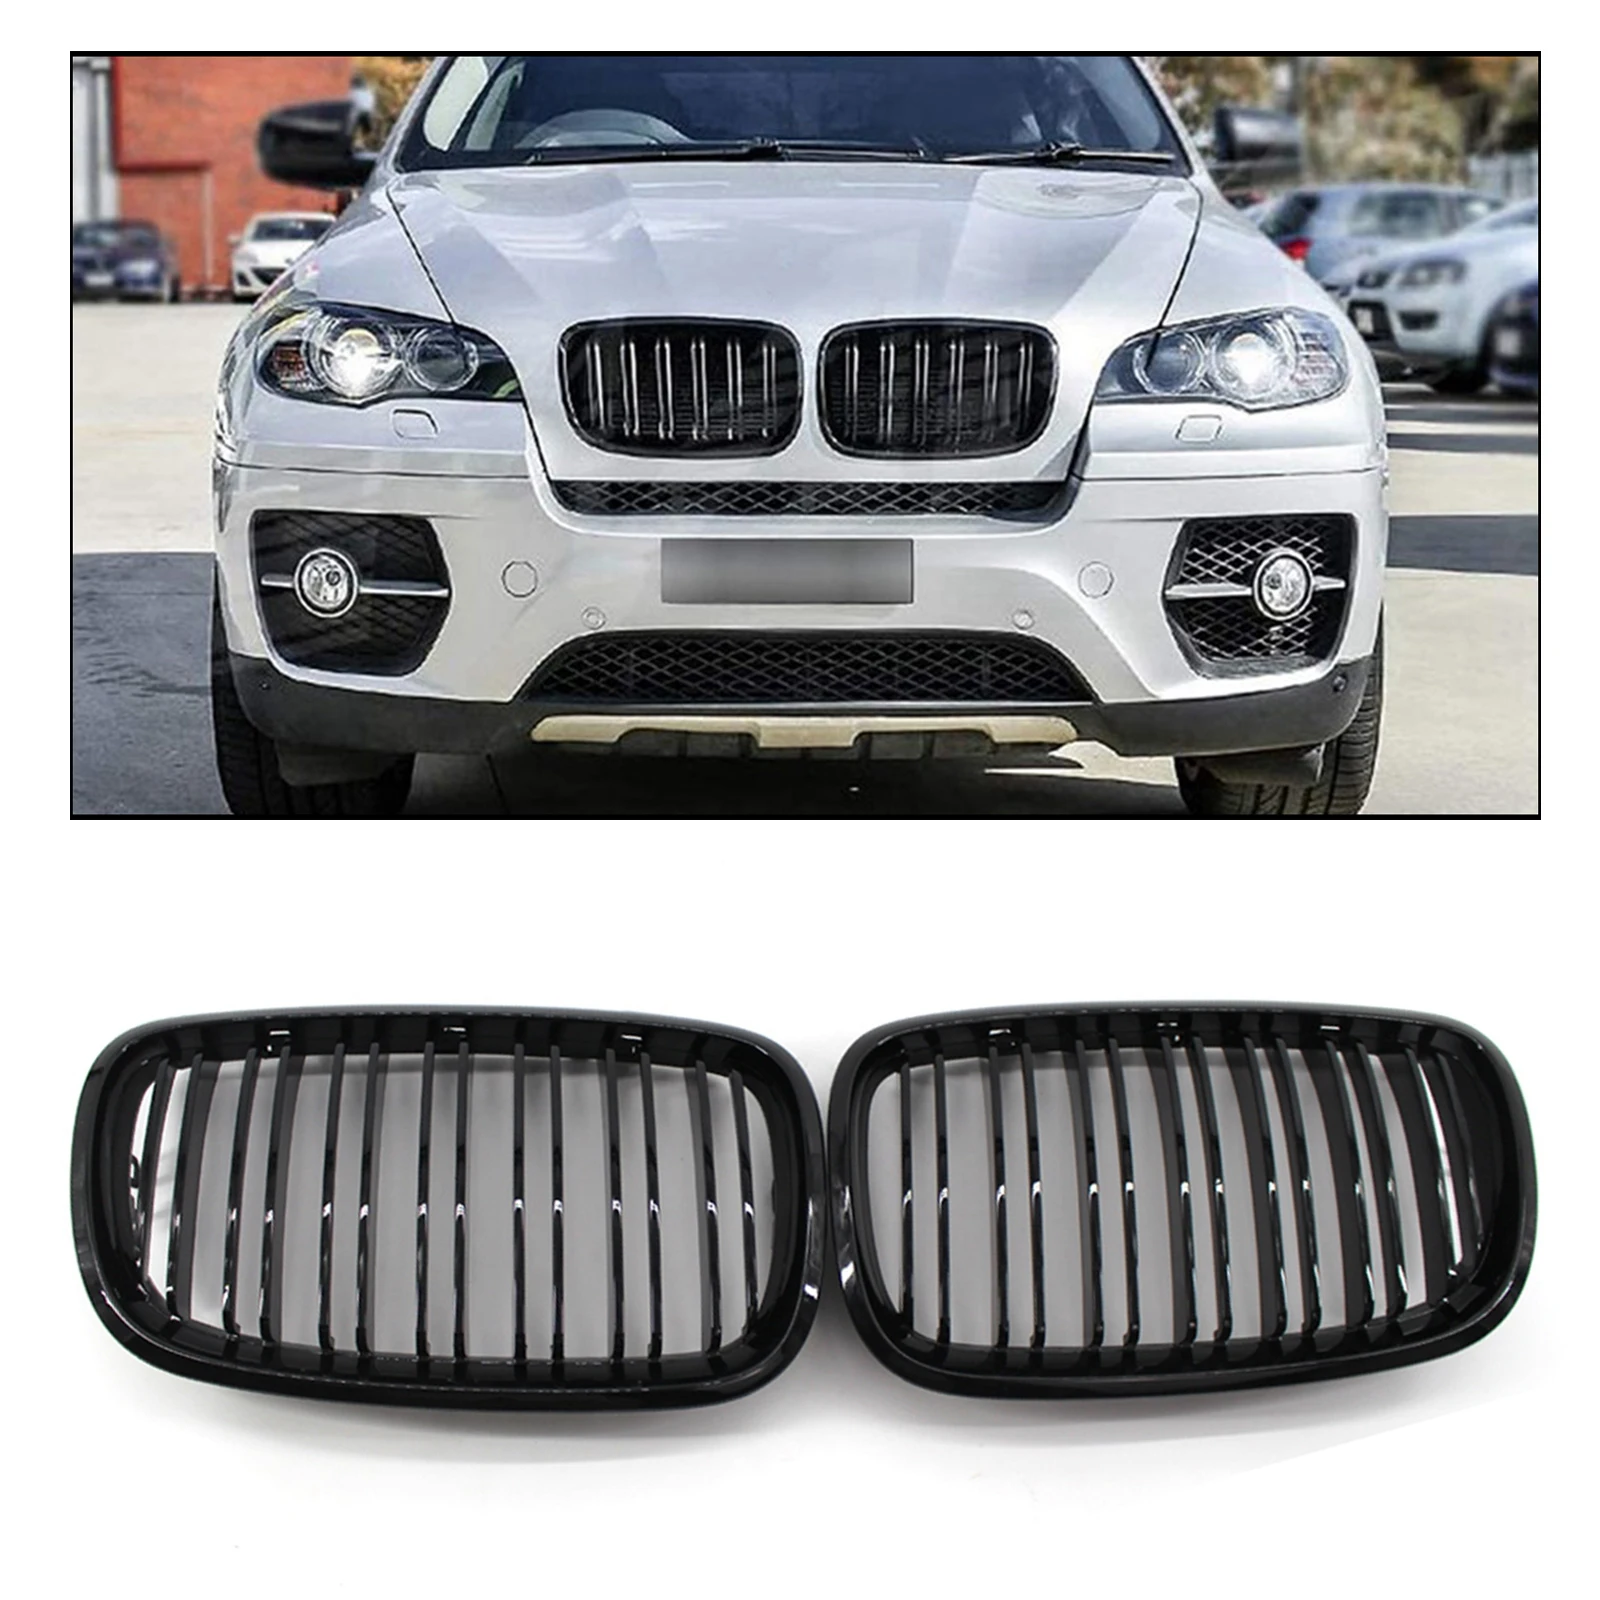 Black Front Kidney Double Line Grill Grille for BMW X5 E70 E71 2007 2008 2009 2010 2011 2012 2013, ABS Gloss Black Grill Set